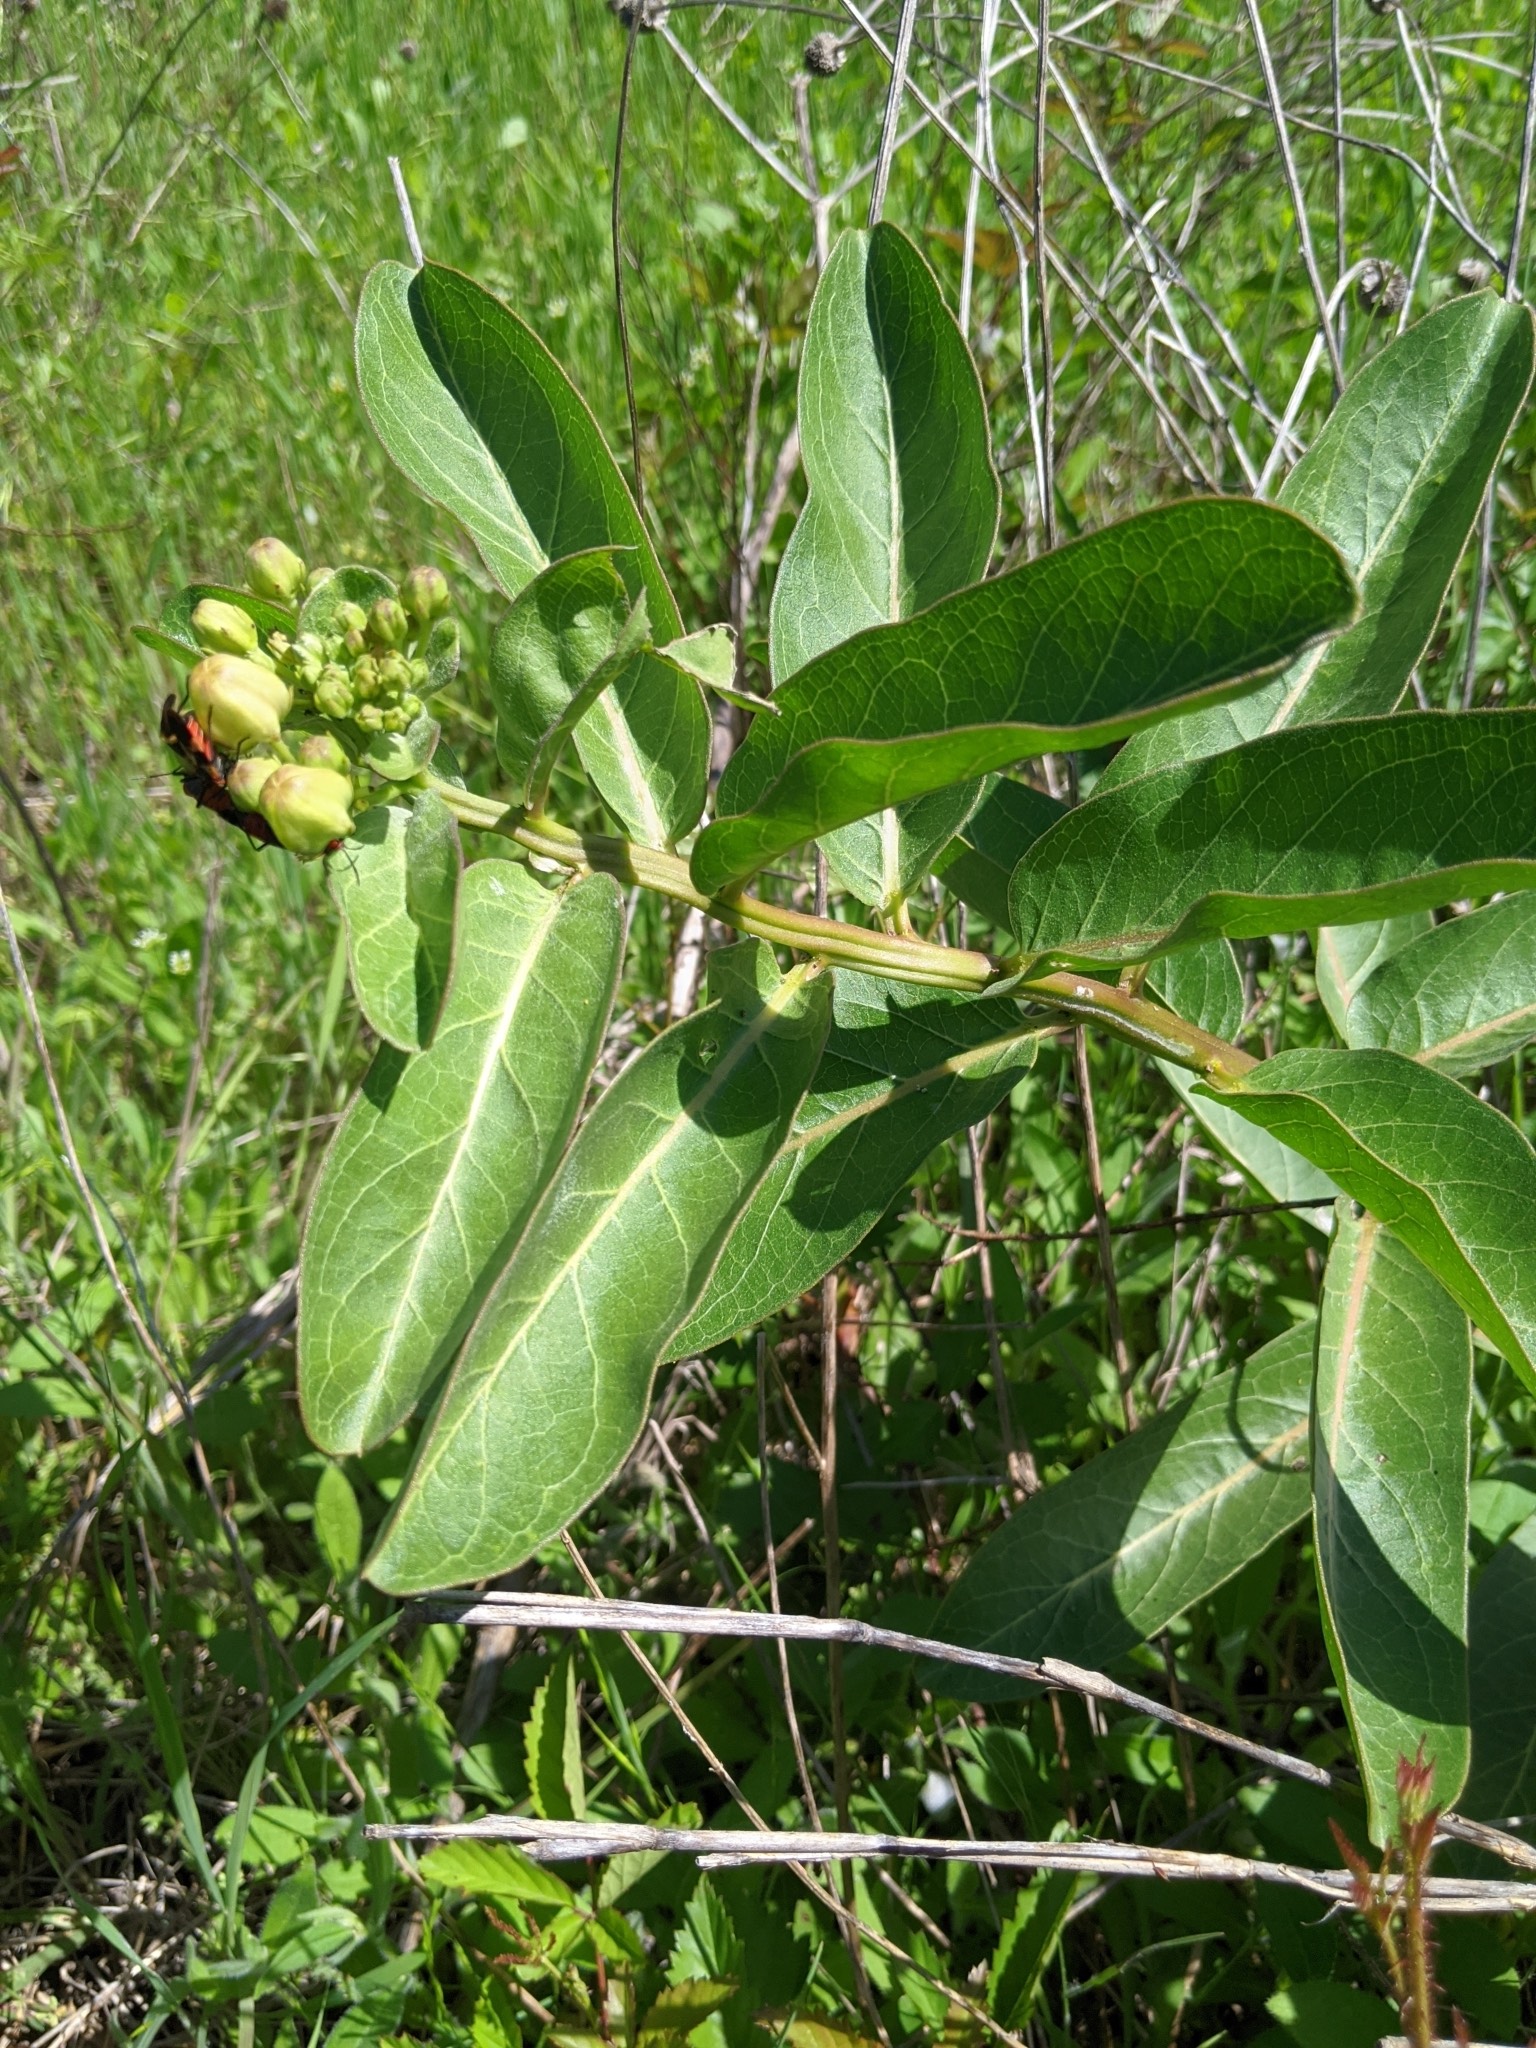 The Scientific Name is Asclepias viridis. You will likely hear them called Little Green Milkweed, Green Antelope-horn, Spider Milkweed. This picture shows the Growing in oak/juniper scrub habitat at Dick Nichols District Park in Austin, TX of Asclepias viridis